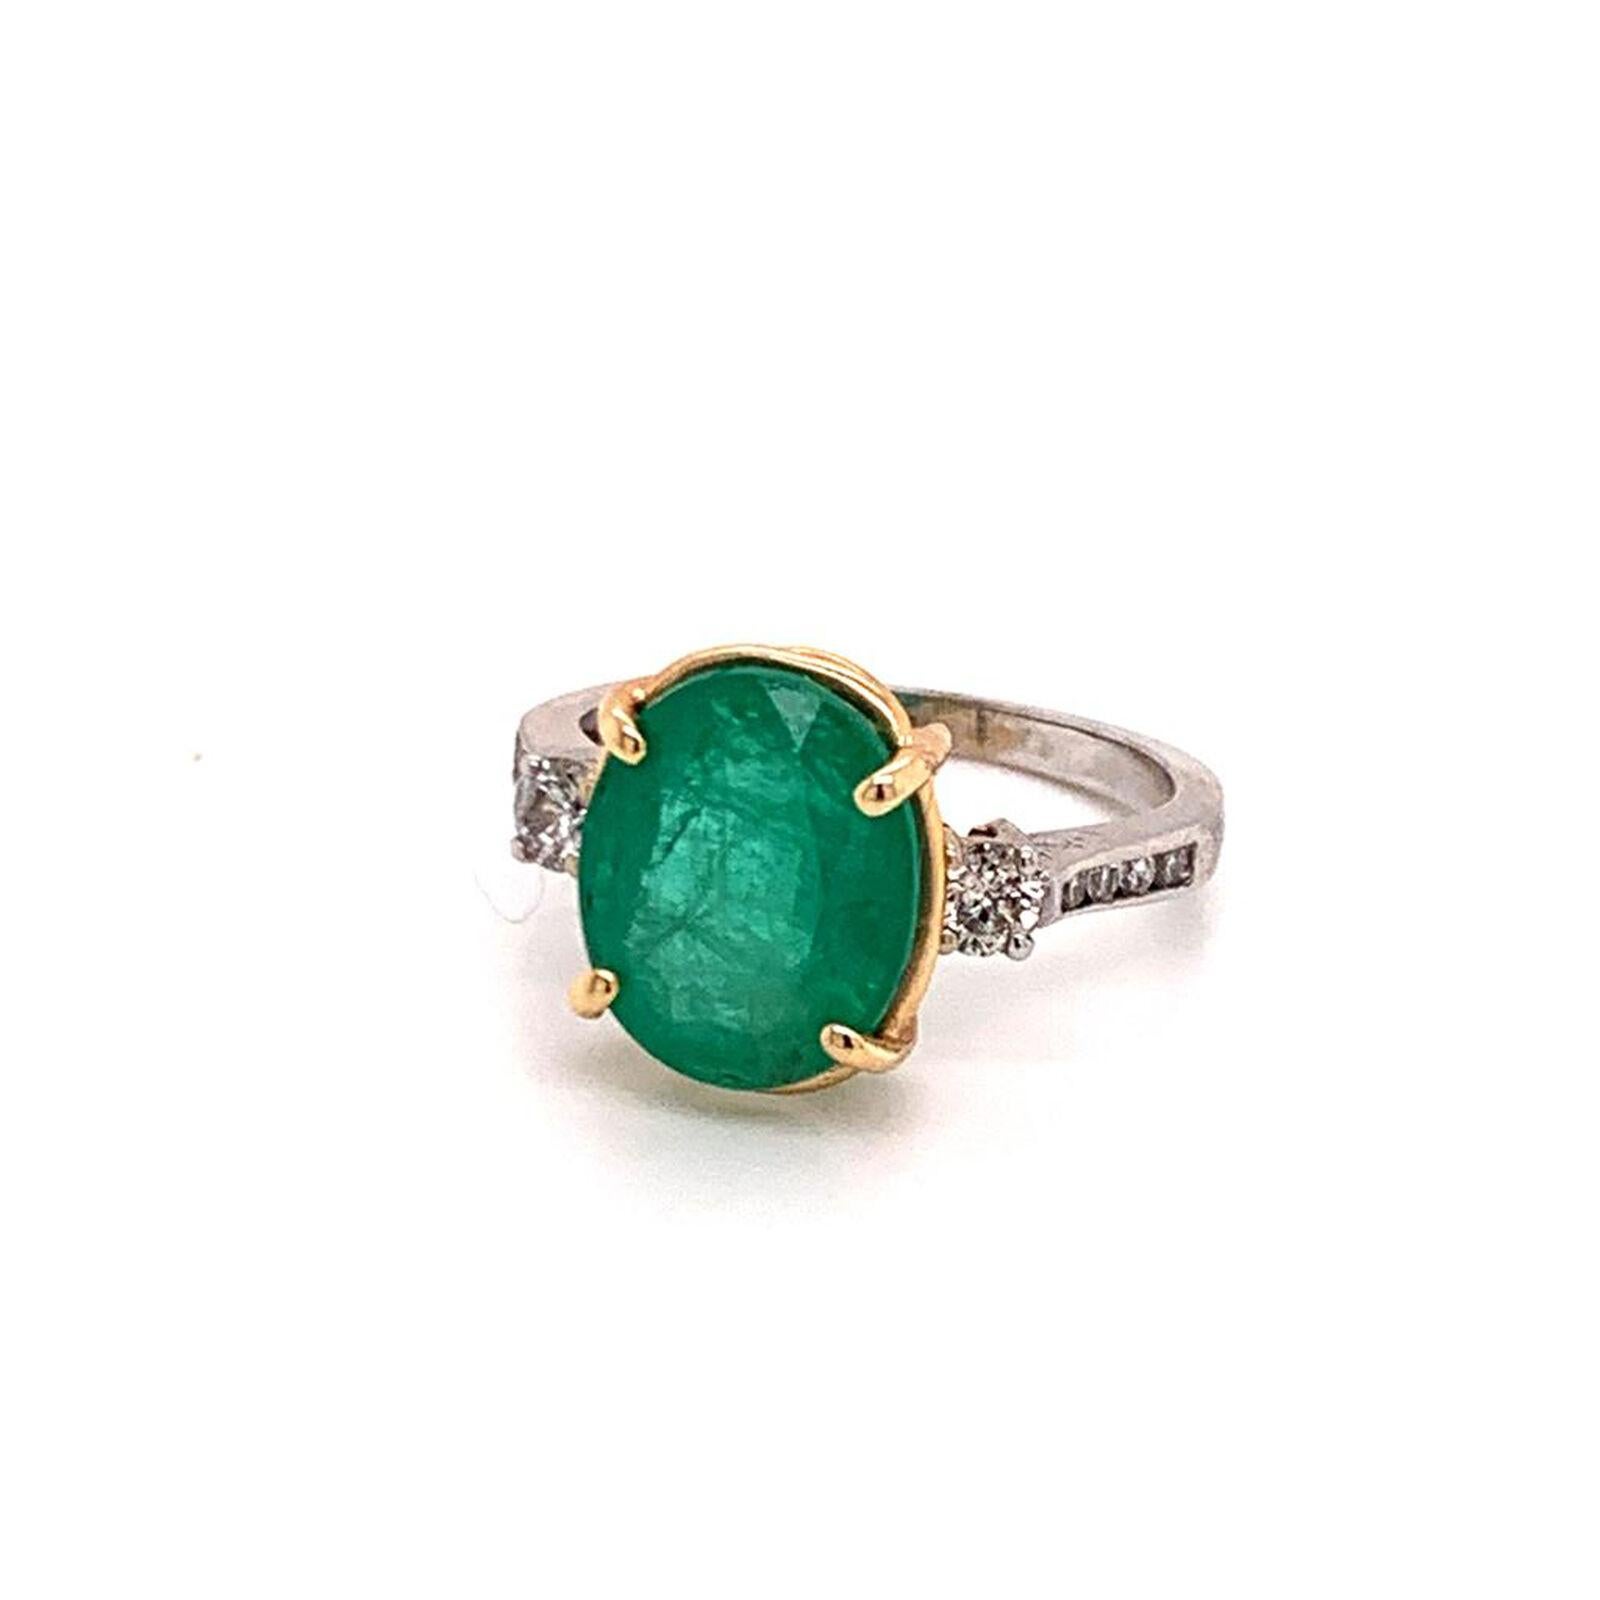 Natural Finely Faceted Quality Emerald Diamond Ring 14k Gold 6.65 TCW Women Certified $5,950 915309

This is a Unique Custom Made Glamorous Piece of Jewelry!

Nothing says, “I Love you” more than Diamonds and Pearls!

This Emerald ring has been